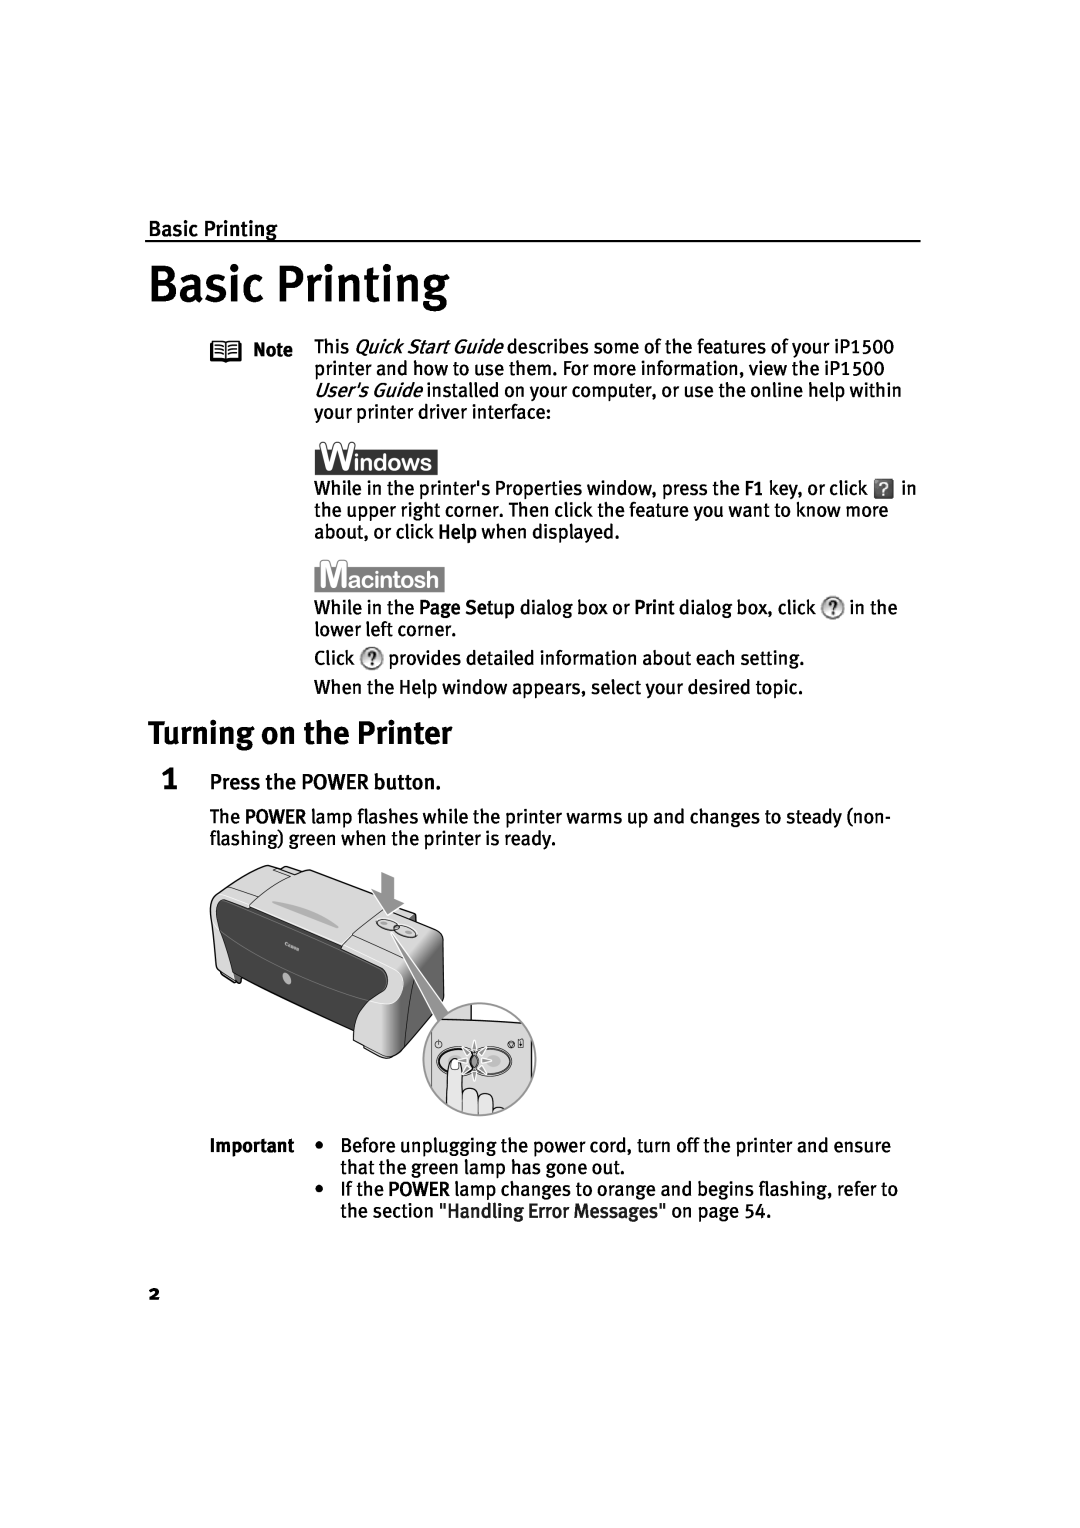 Canon IP1500 quick start Basic Printing, Turning on the Printer, Press the POWER button 